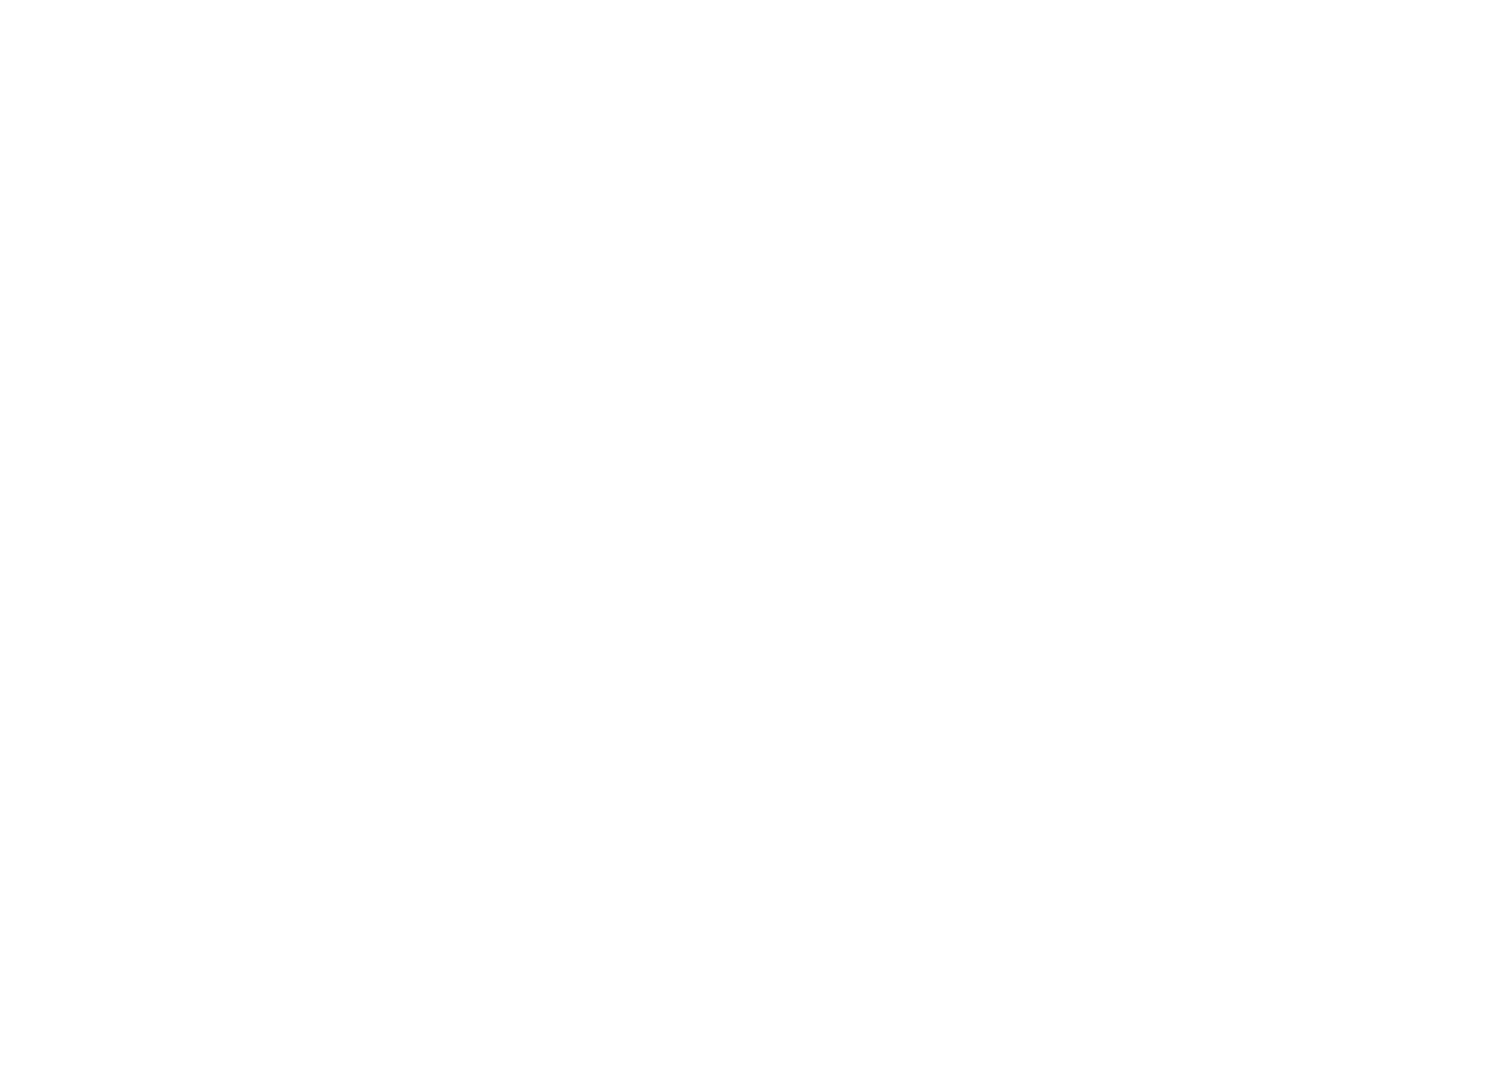 SOLID SIGNS DUBBO - Signs - Murals - Design